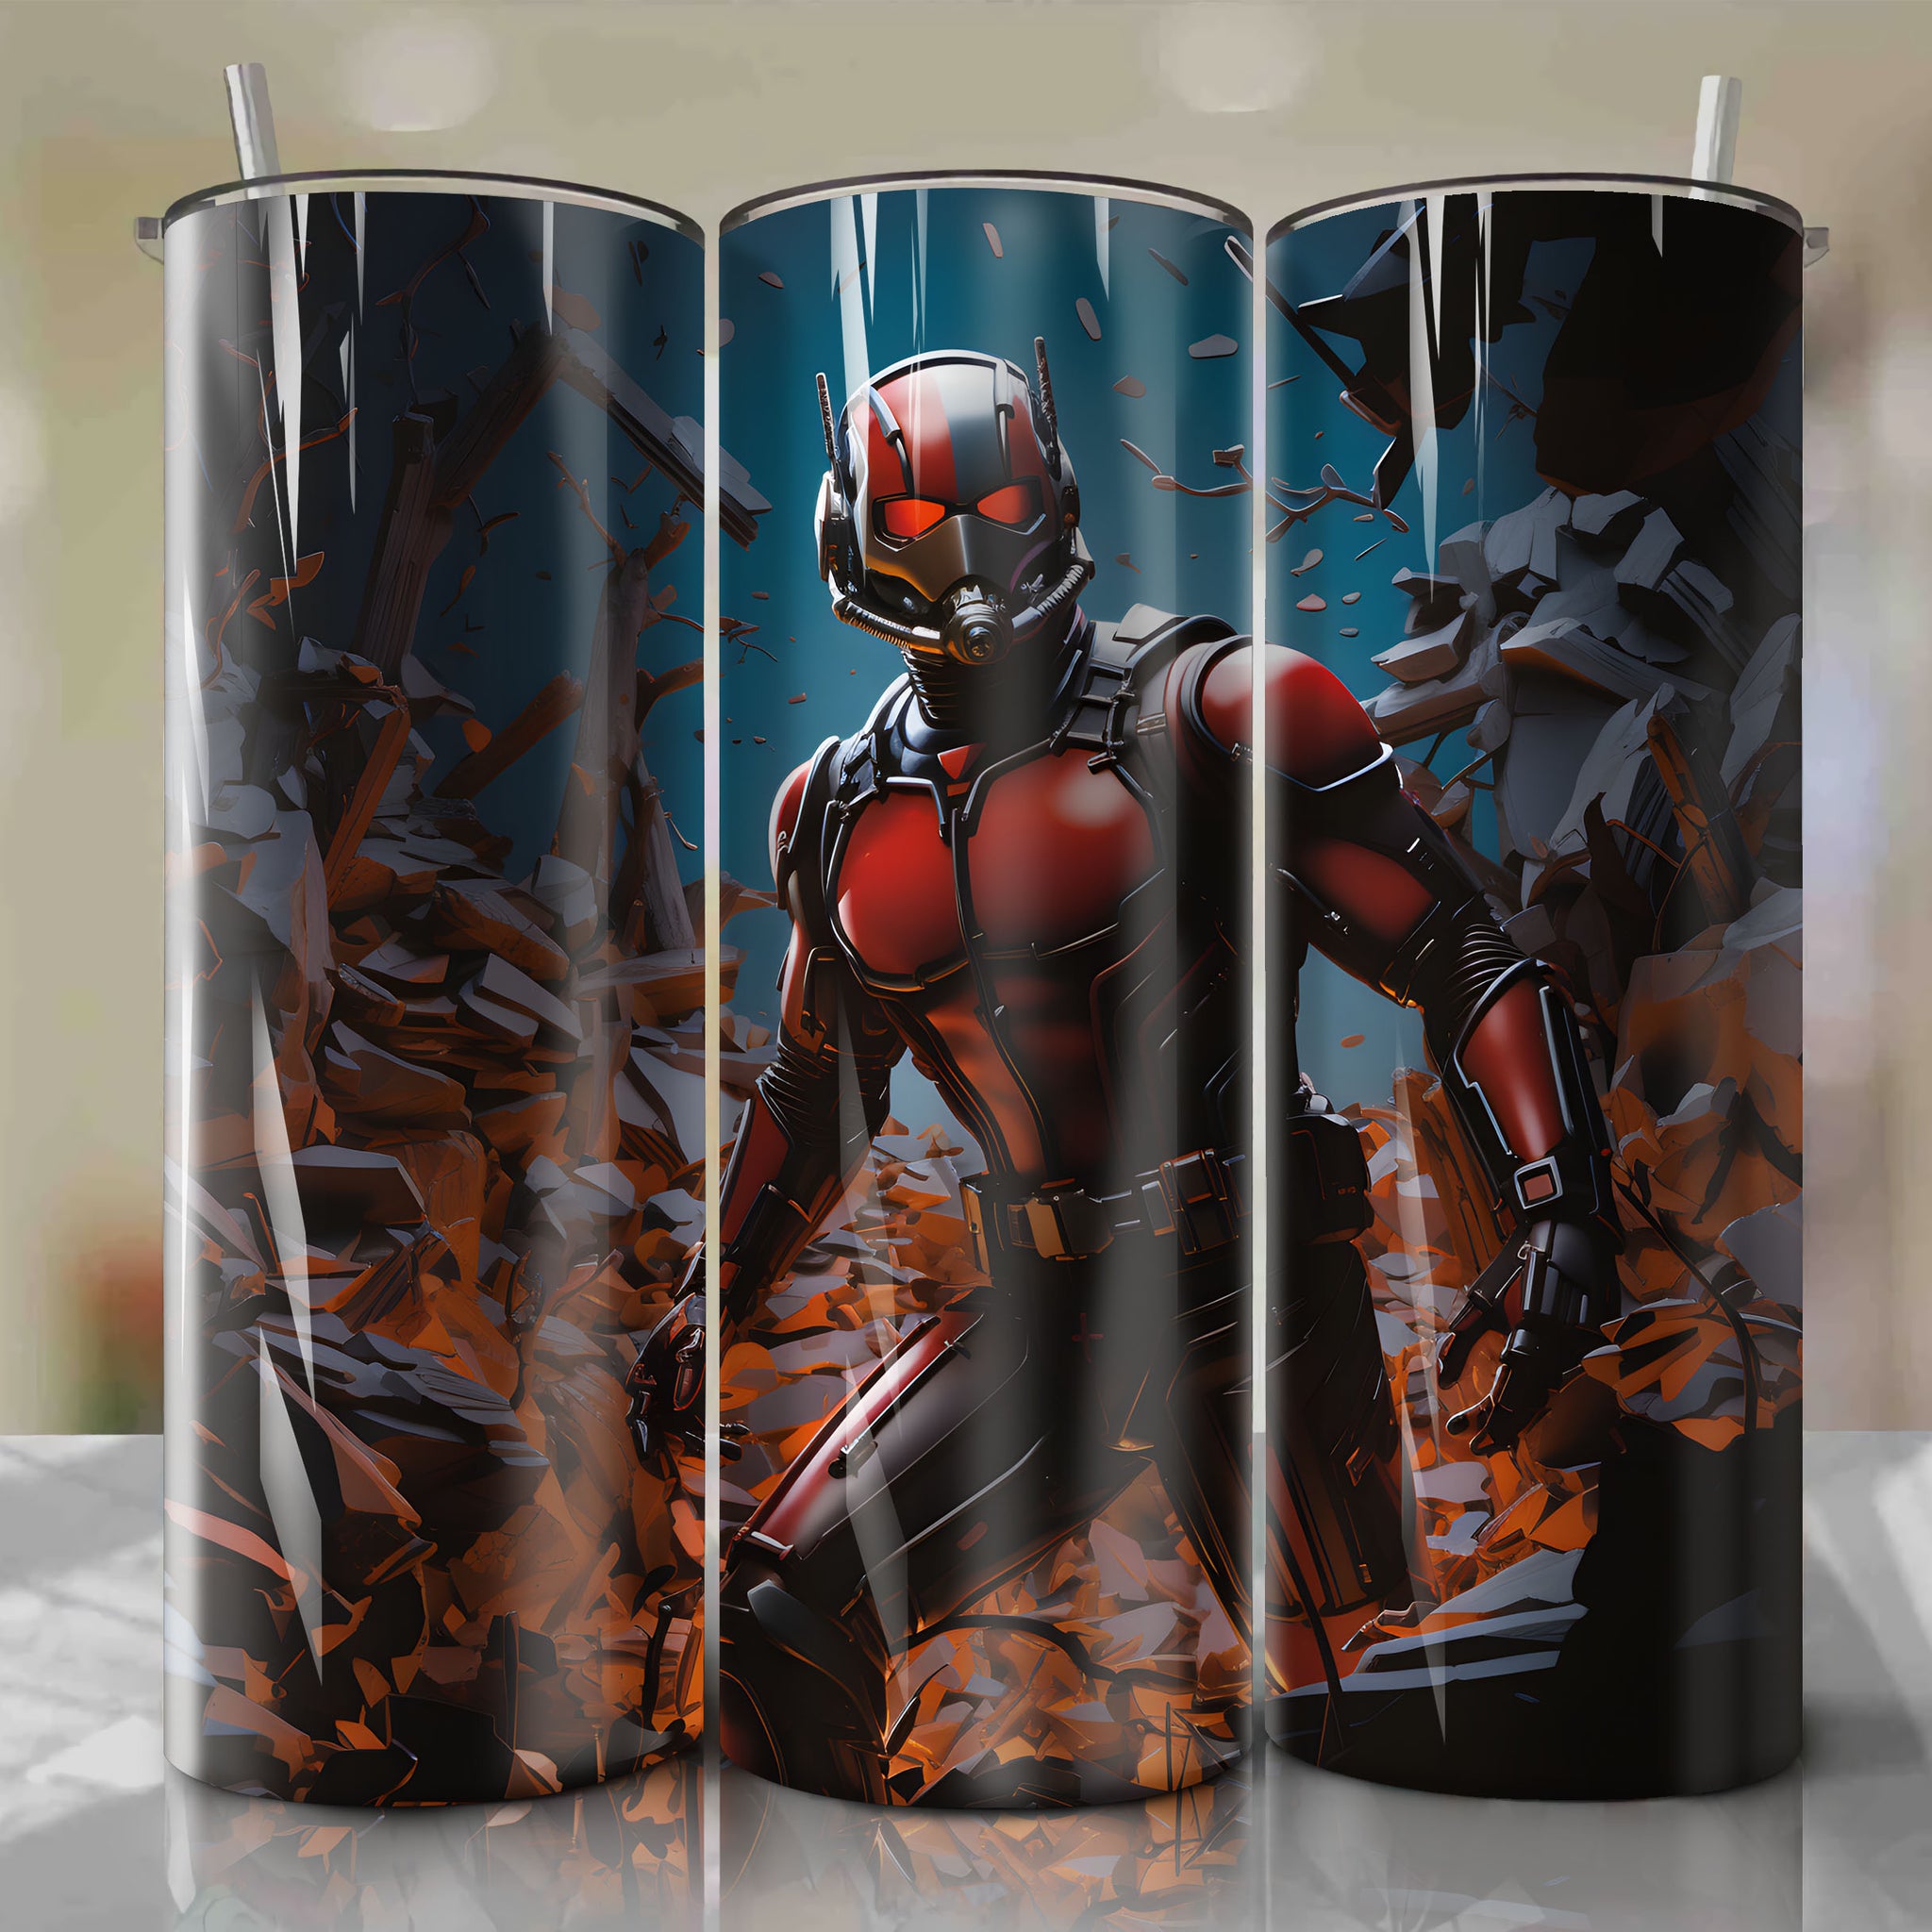 20 Oz Tumbler Wrap - Ant-Man emerges from an ant hill, capturing the marvel of scaling in stunning comic book art
